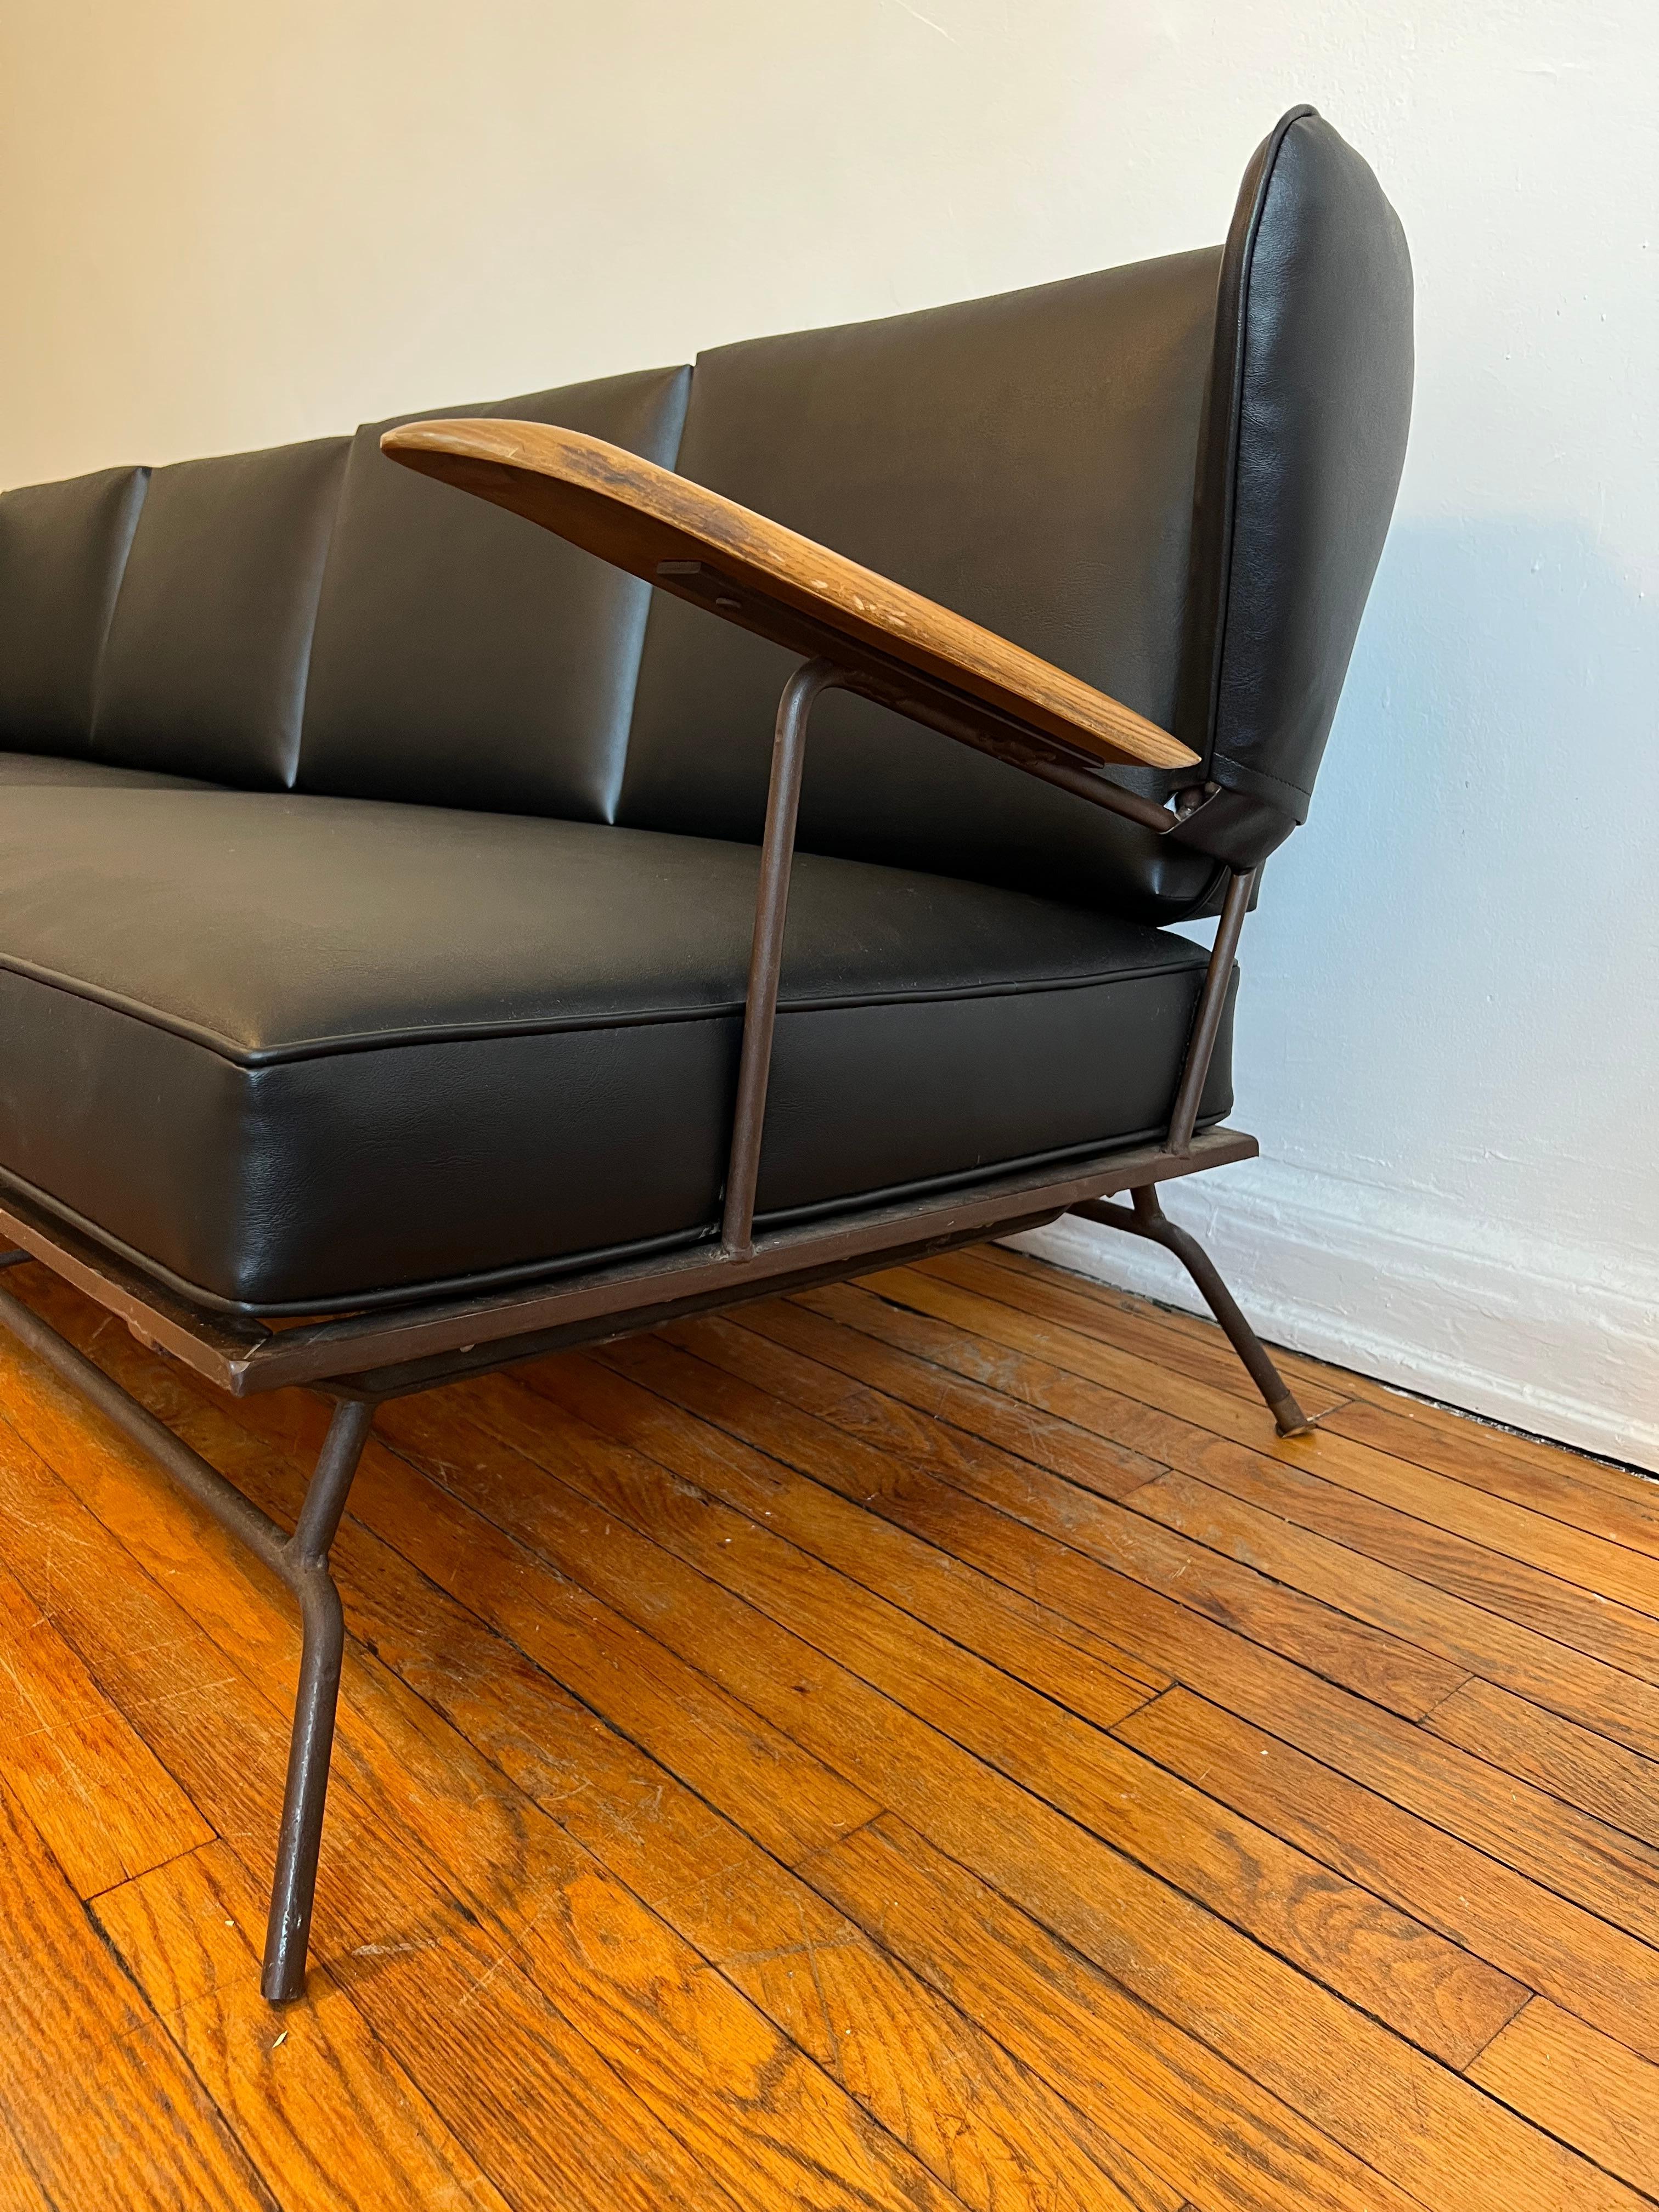 Very Rare sofa by North Carolina Blacksmith and furniture designer and maker Max Stout.

Wingback sofa with wooden arm rests in patinated metal and black re-upholstered naugahyde. Our gallery is lucky enough to also have the same sofa in Orange